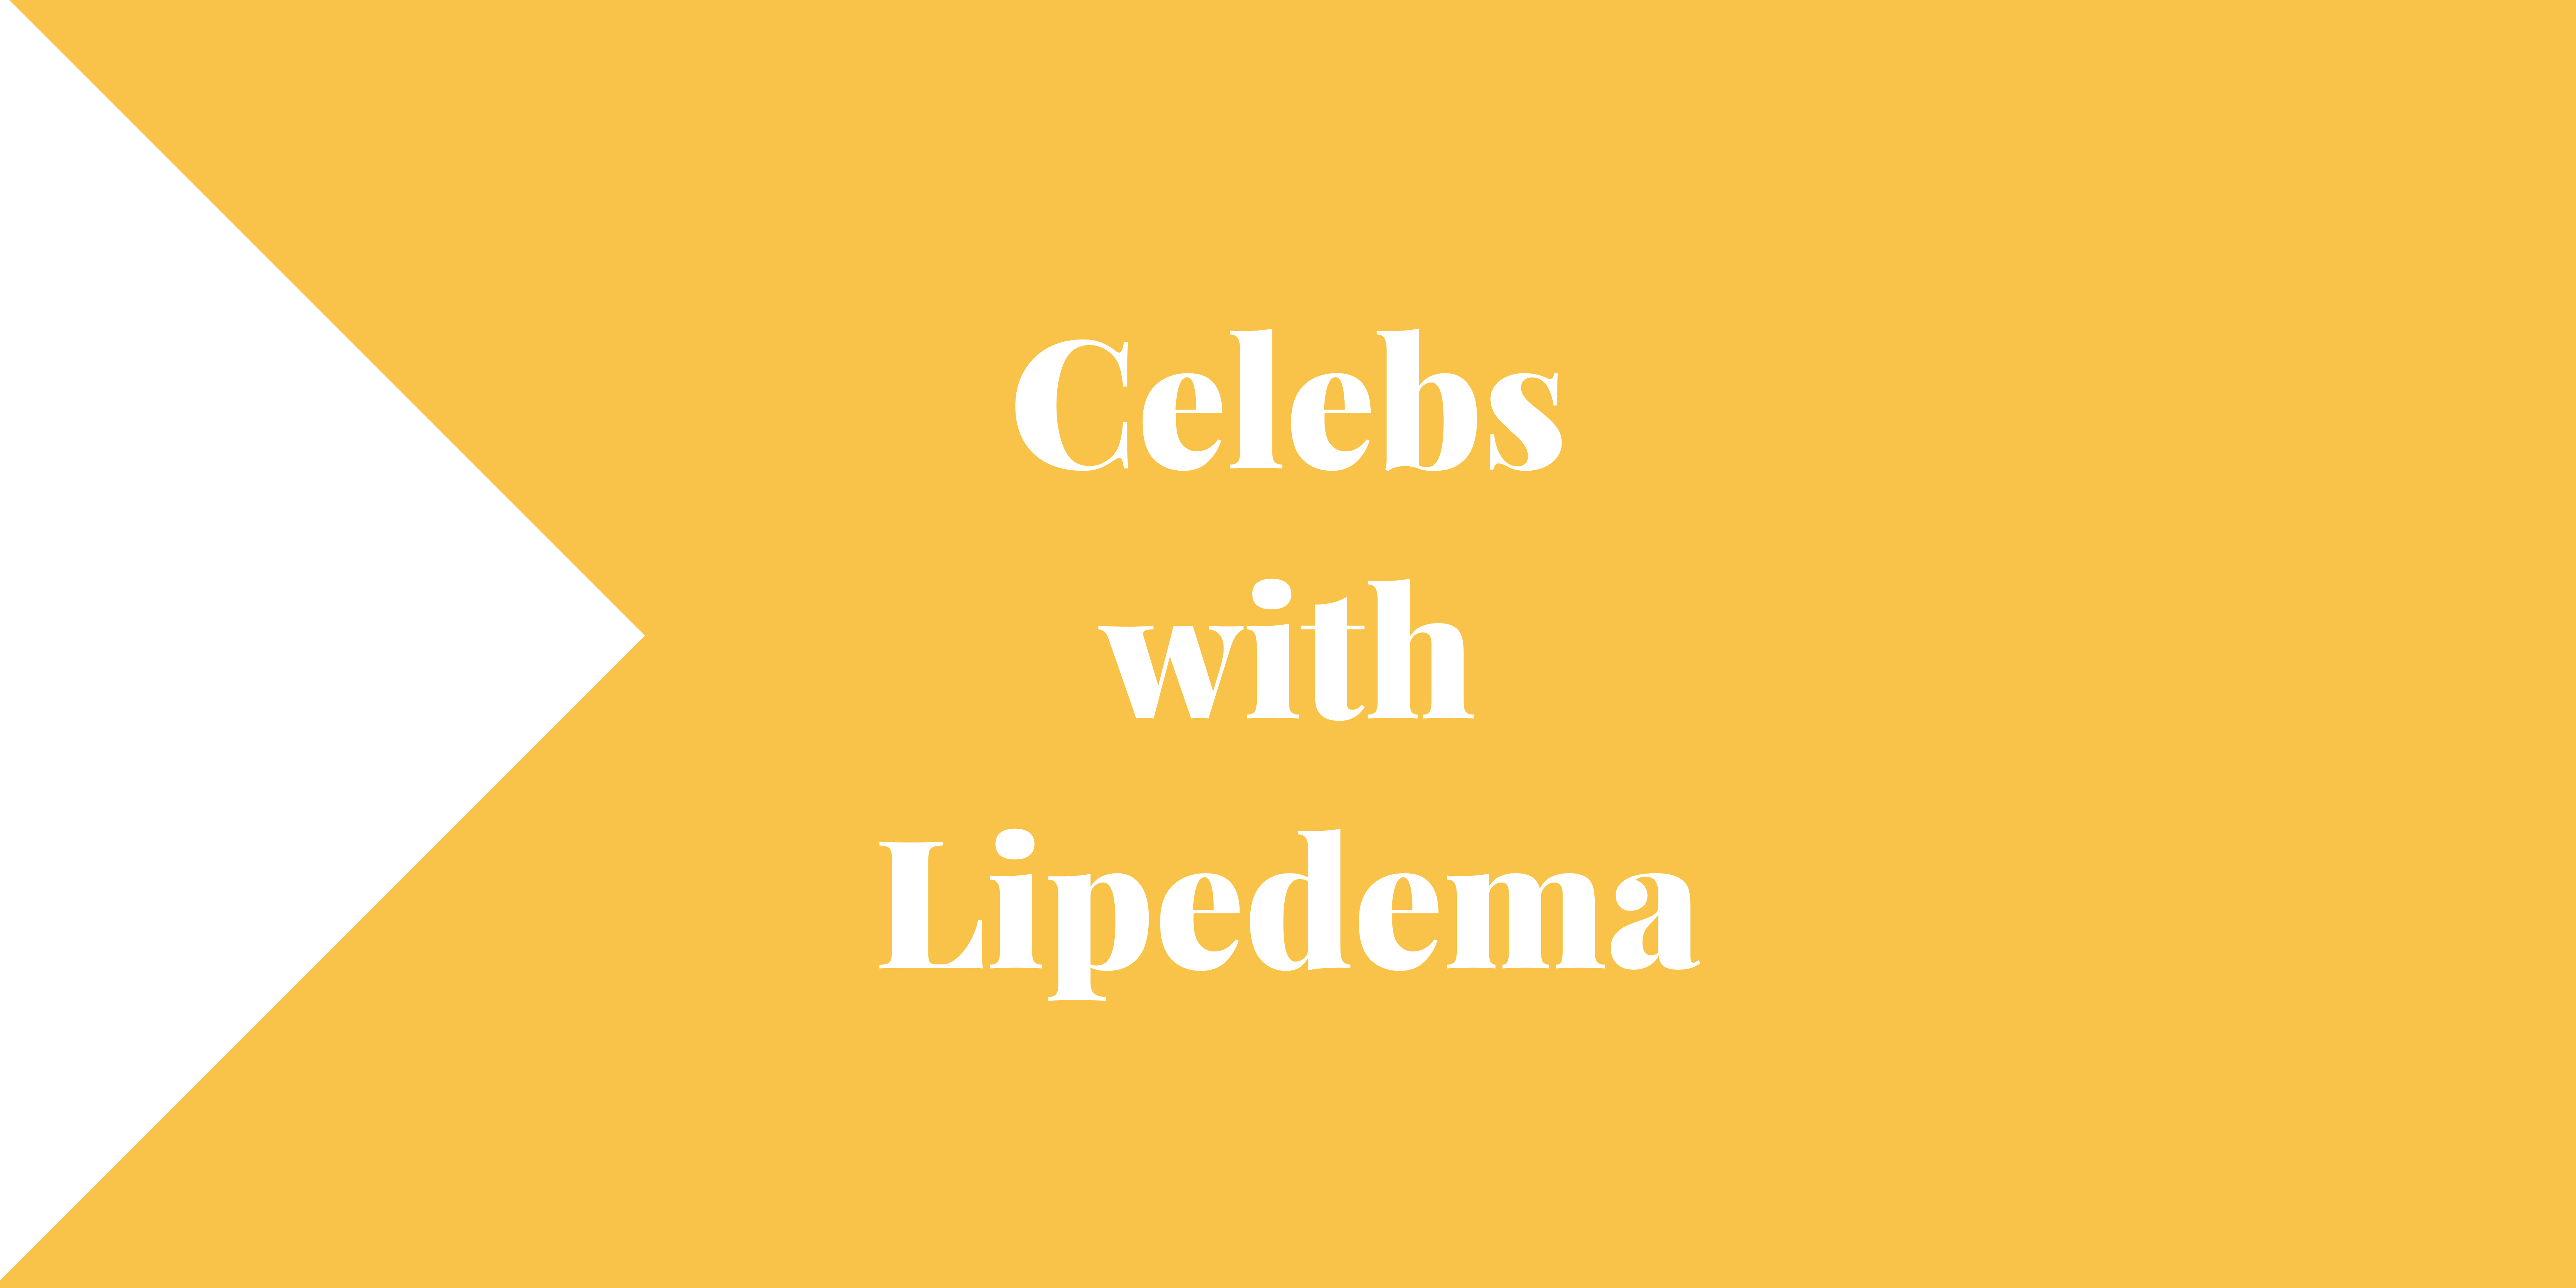 10 Celebrities With Lipedema - Their Stories And Struggles - ElephantSands:  Your World, Upgraded